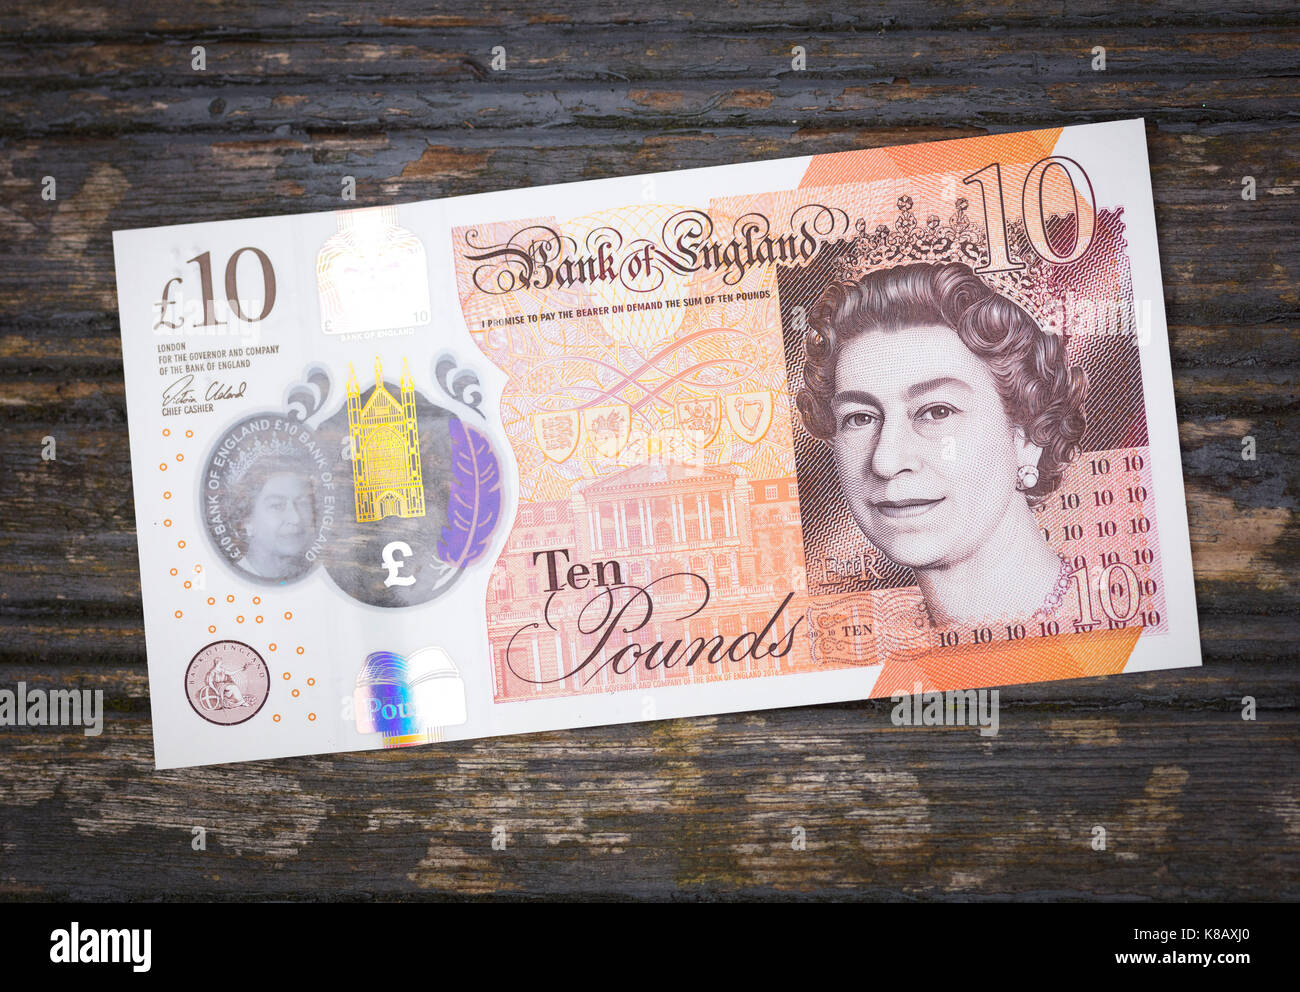 New Plastic Ten Pound Note, Went into circulation on 14th September 2017. Stock Photo